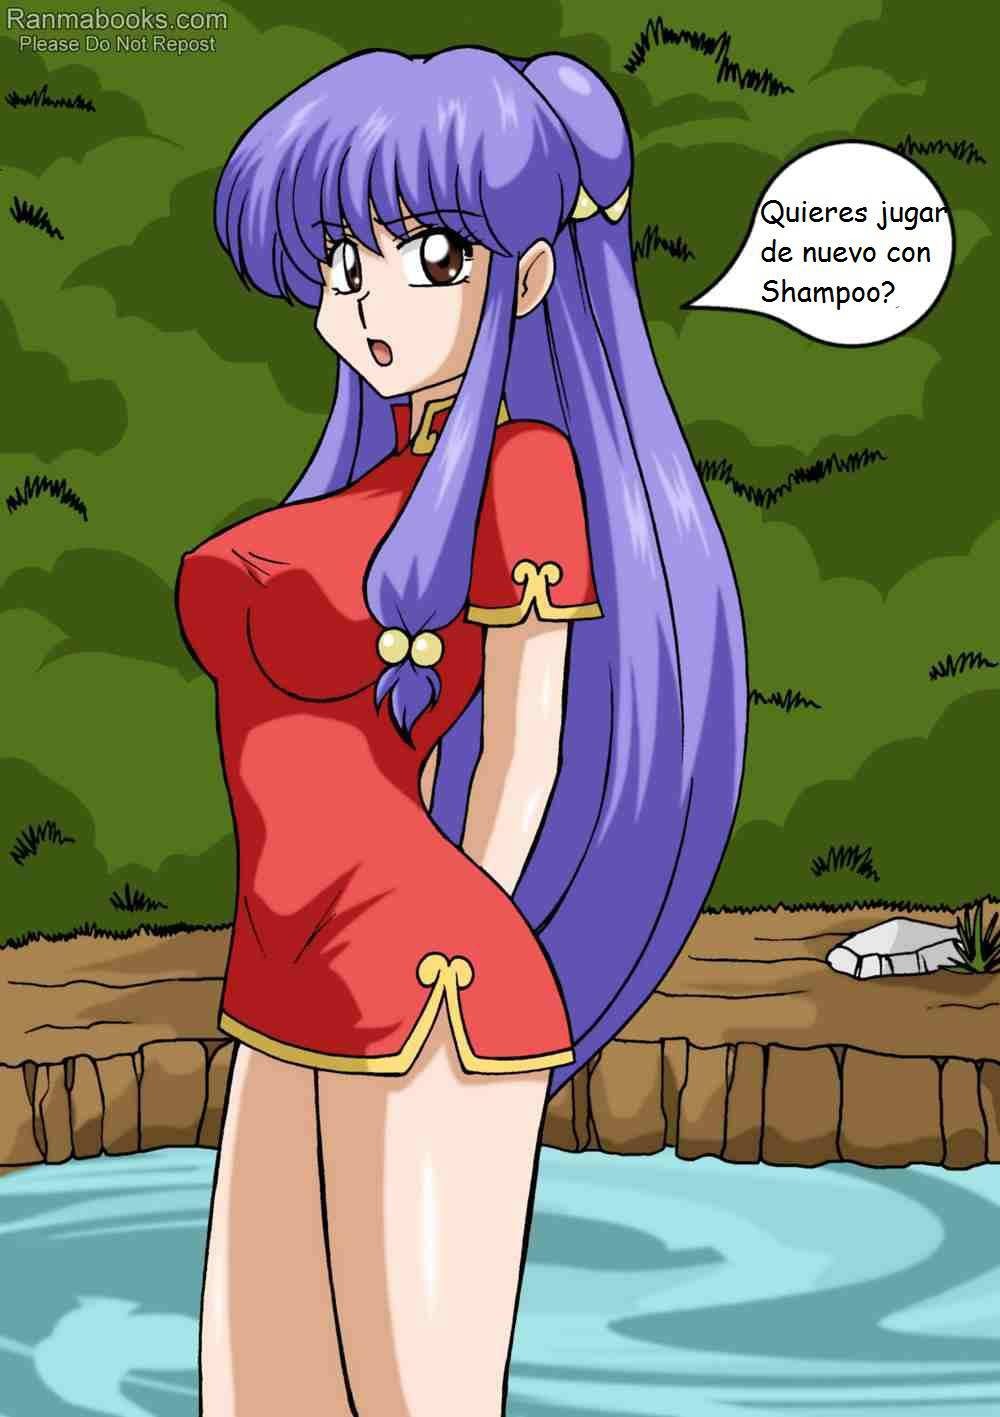 RANMA 1/2 Anything Goes parte 2